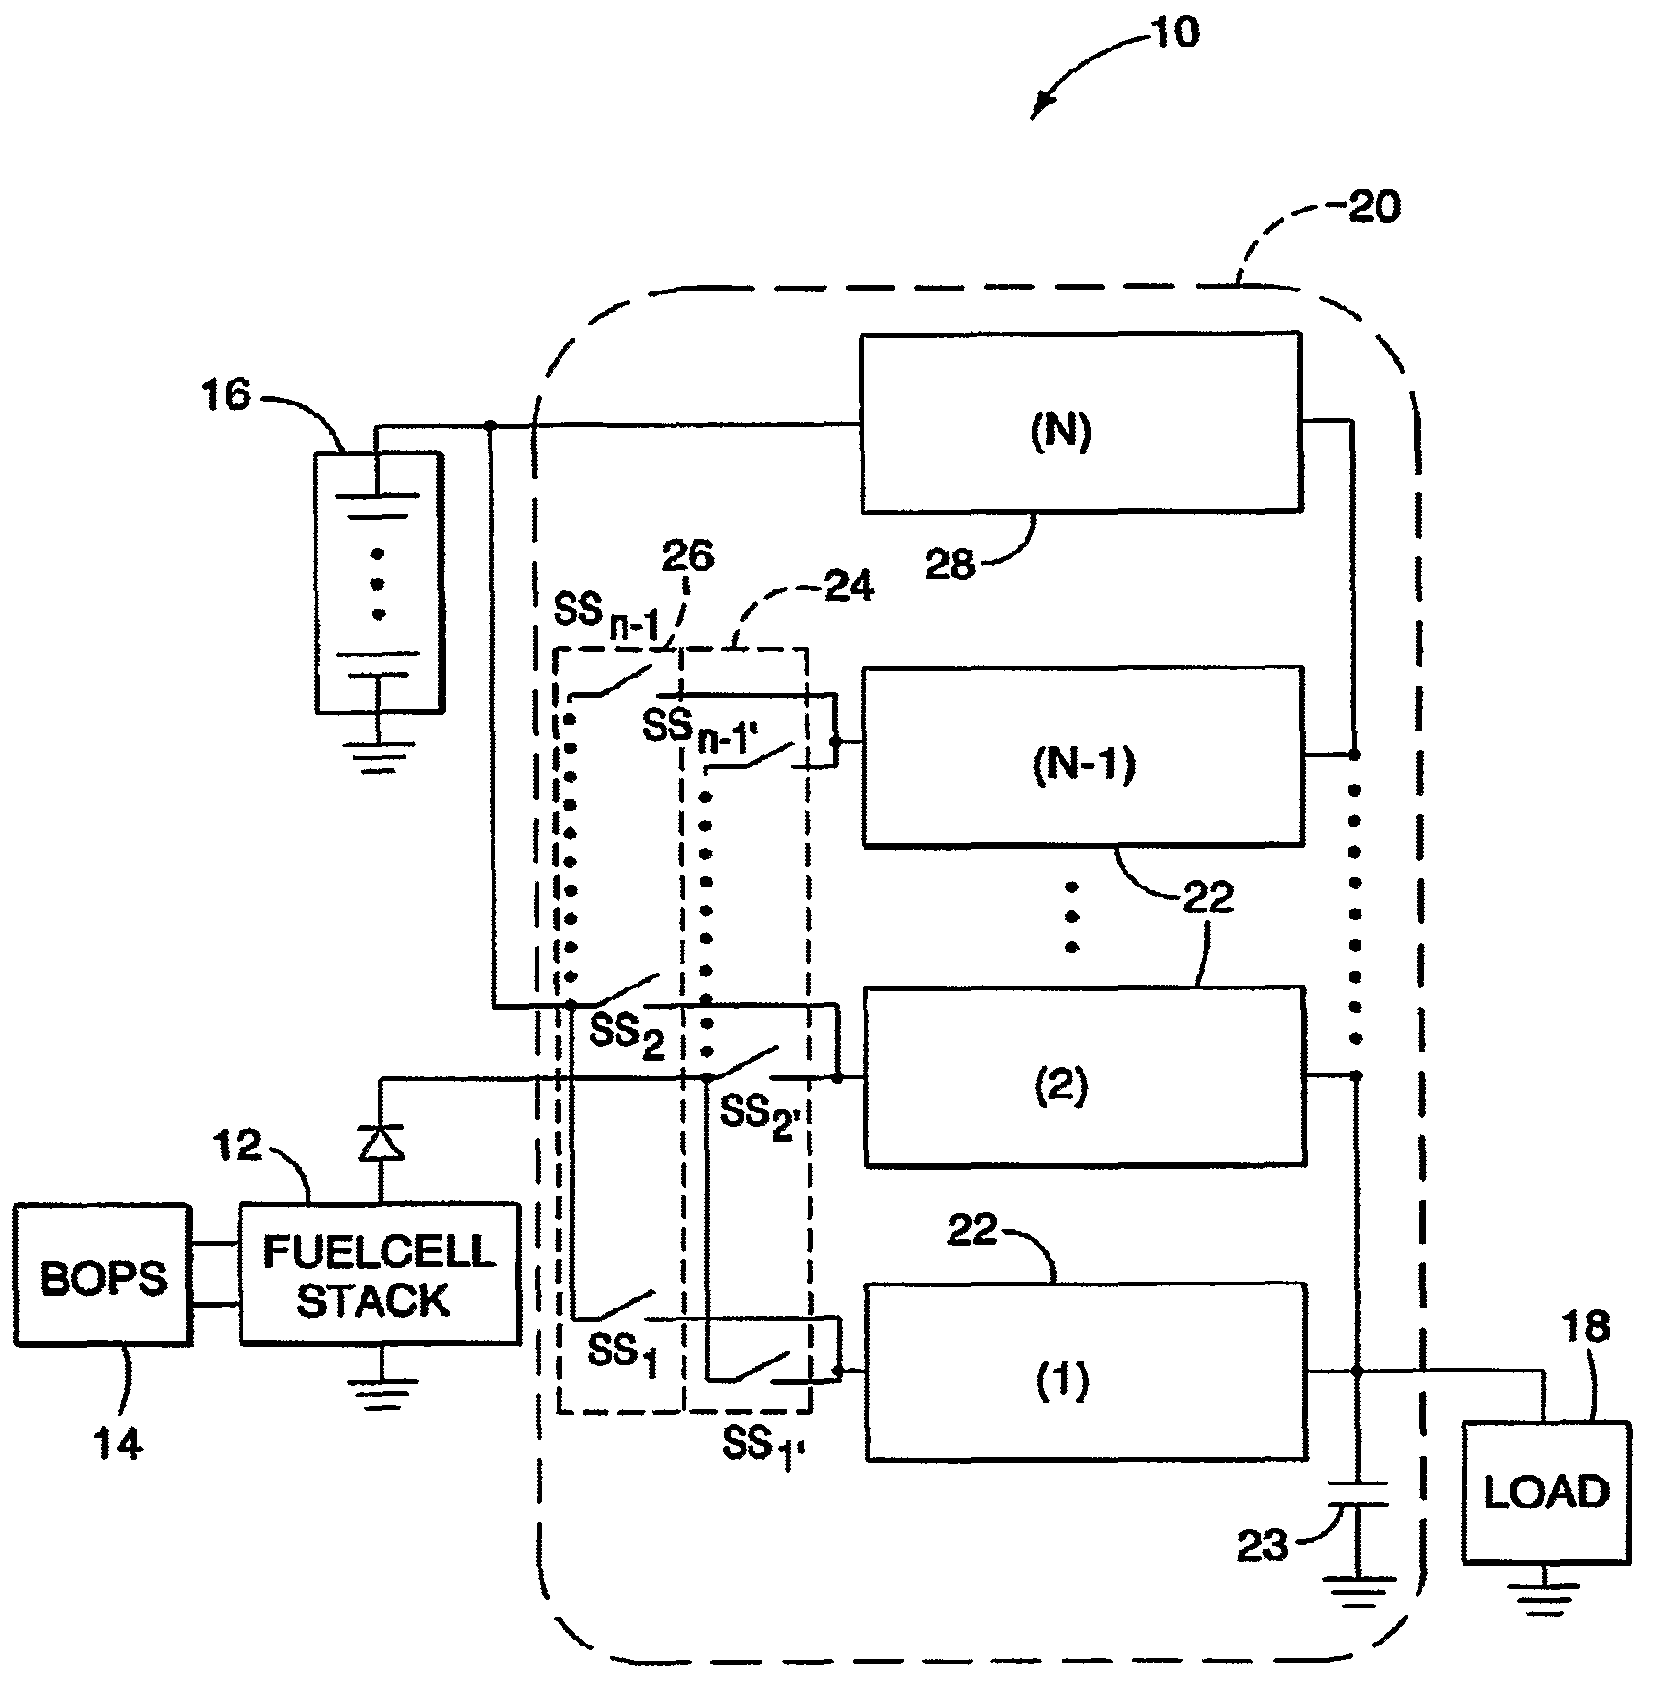 Fuel-cell based power generating system having power conditioning apparatus